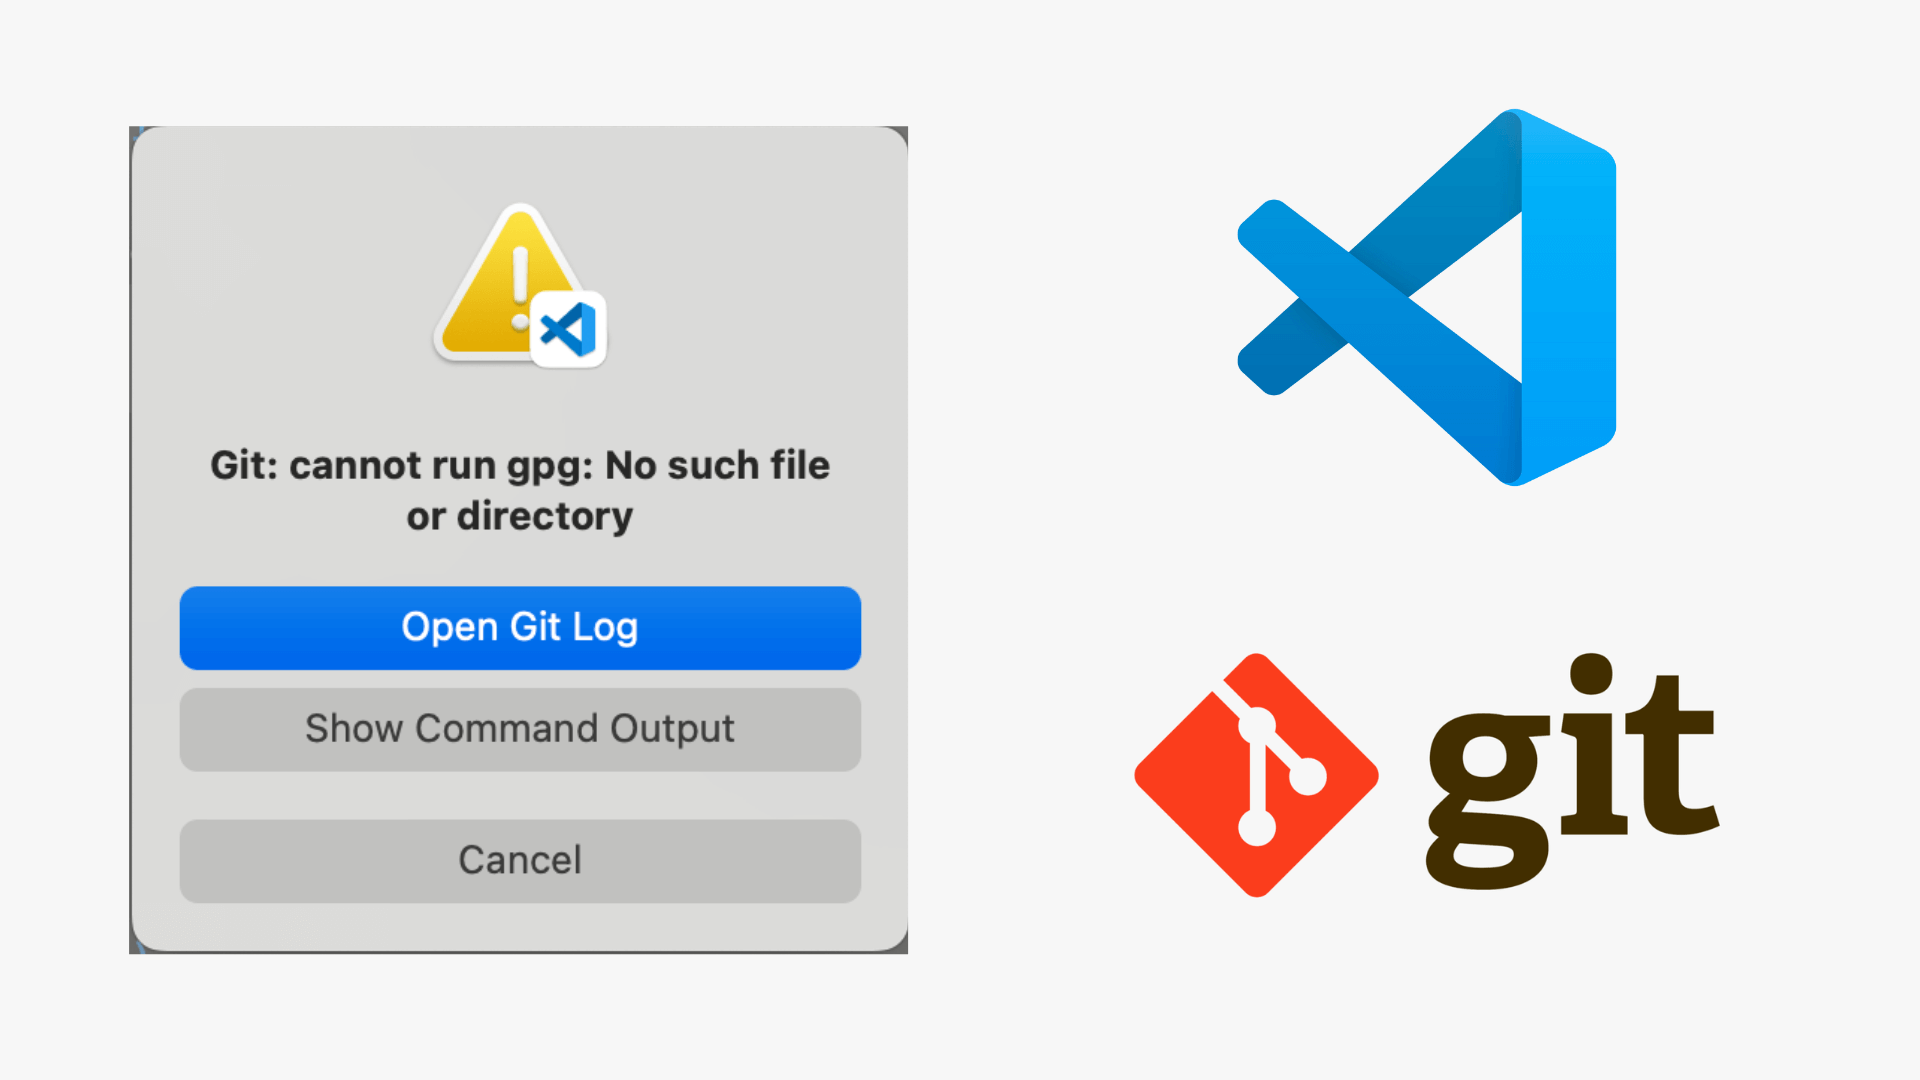 Git: cannot run gpg: No such file or directory